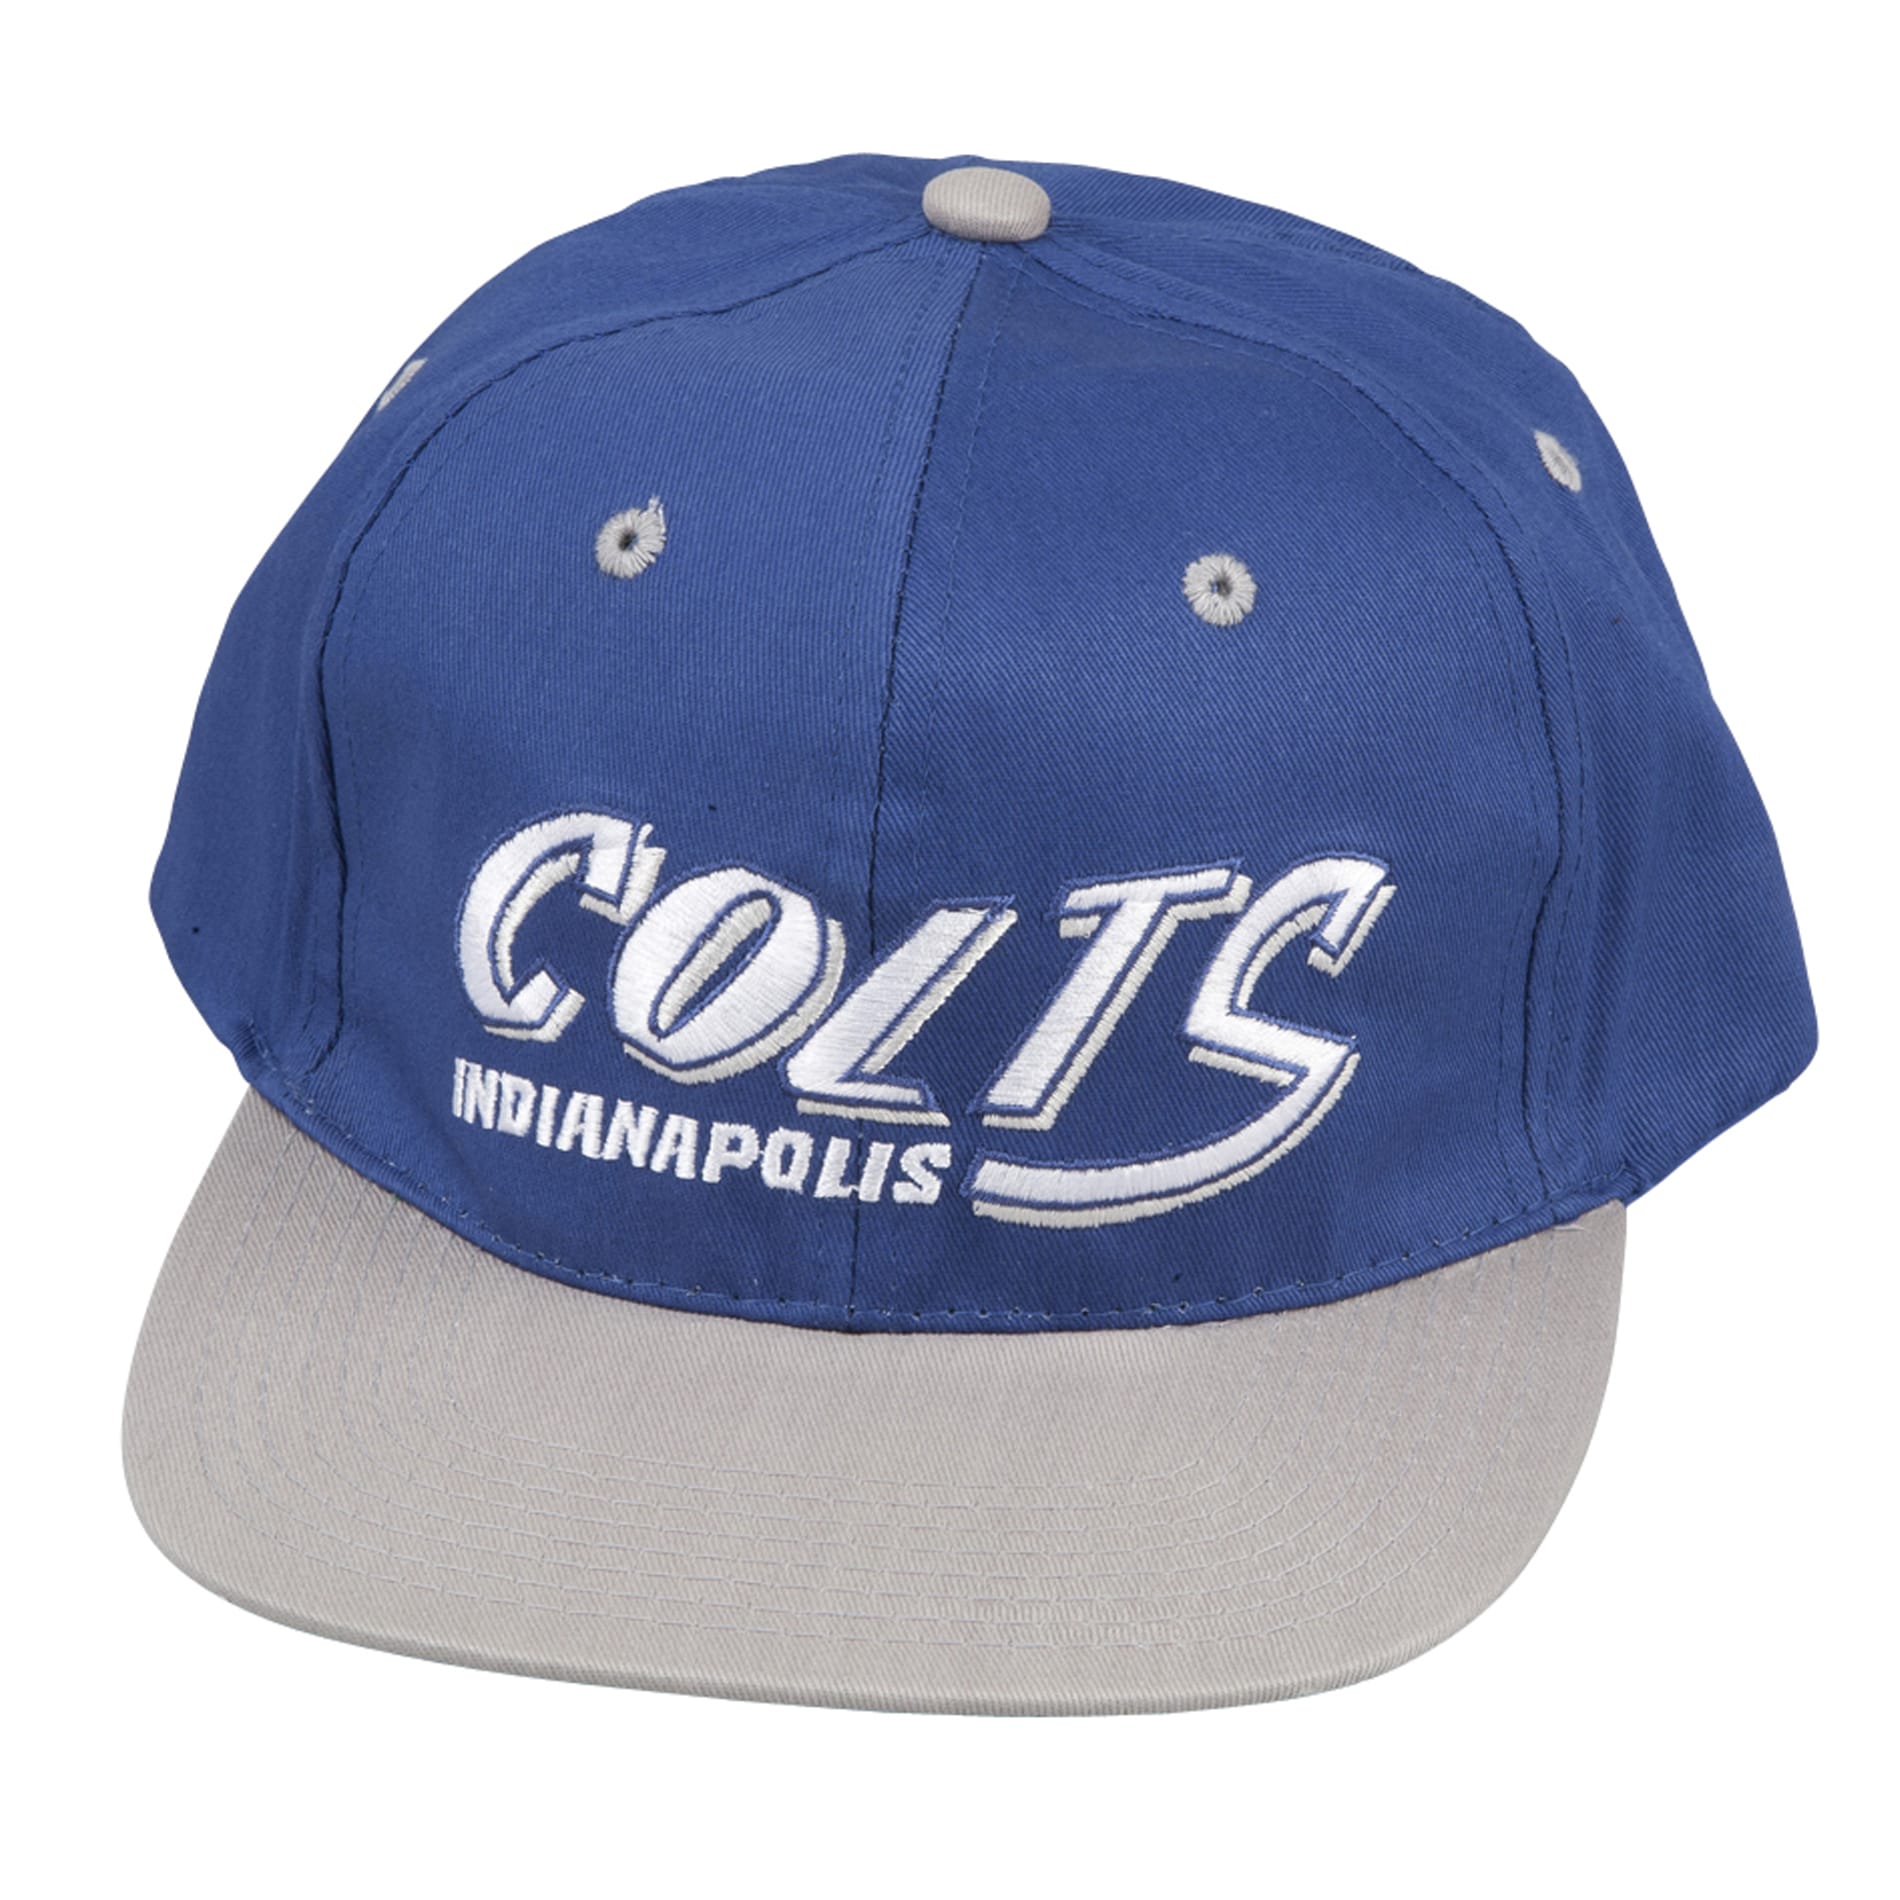 Indianapolis Colts Retro NFL Snapback Hat   Shopping   Great